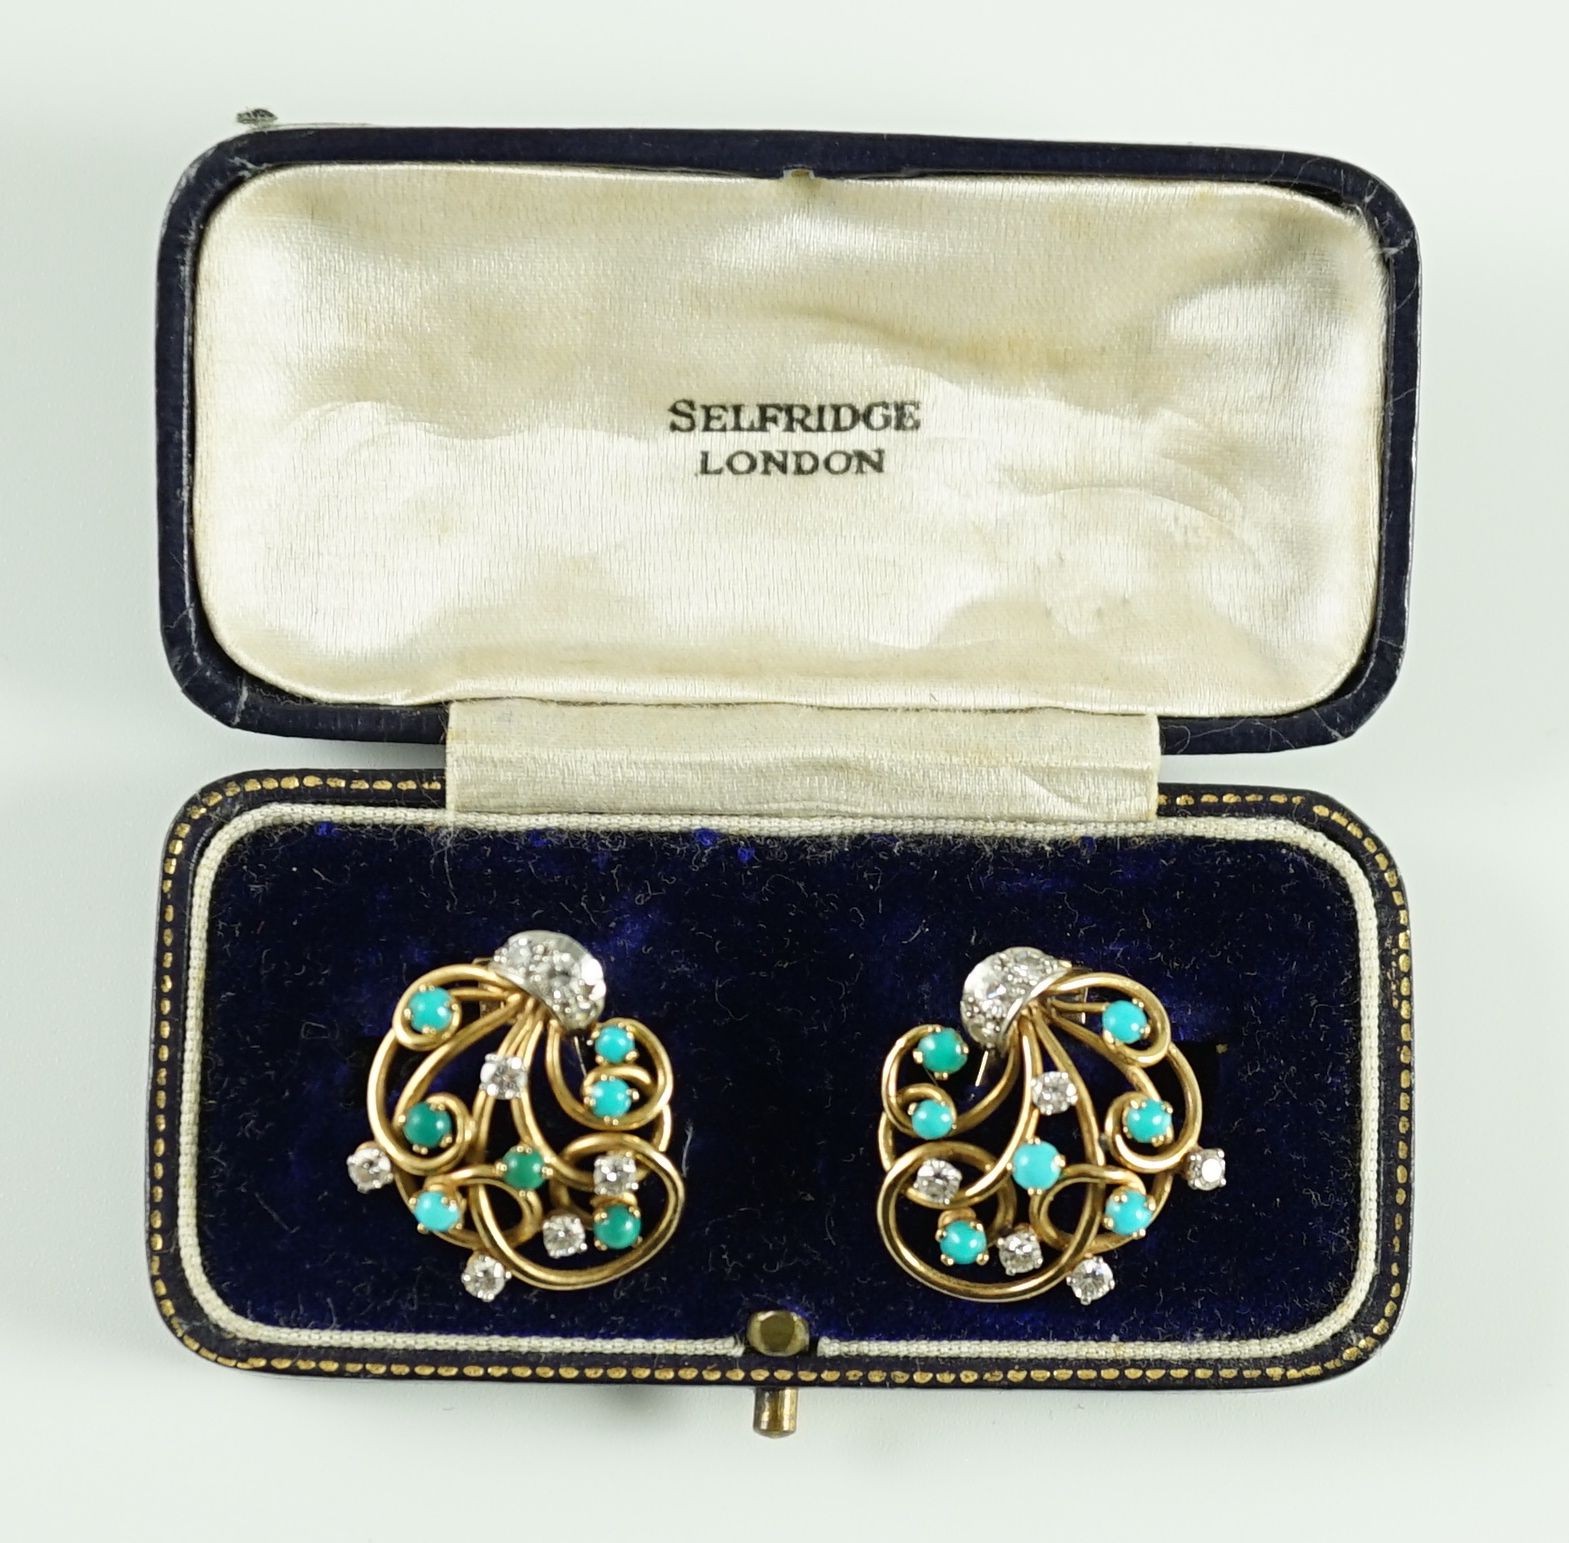 A pair of modern 18k gold diamond and turquoise cluster set scrolling ear clips